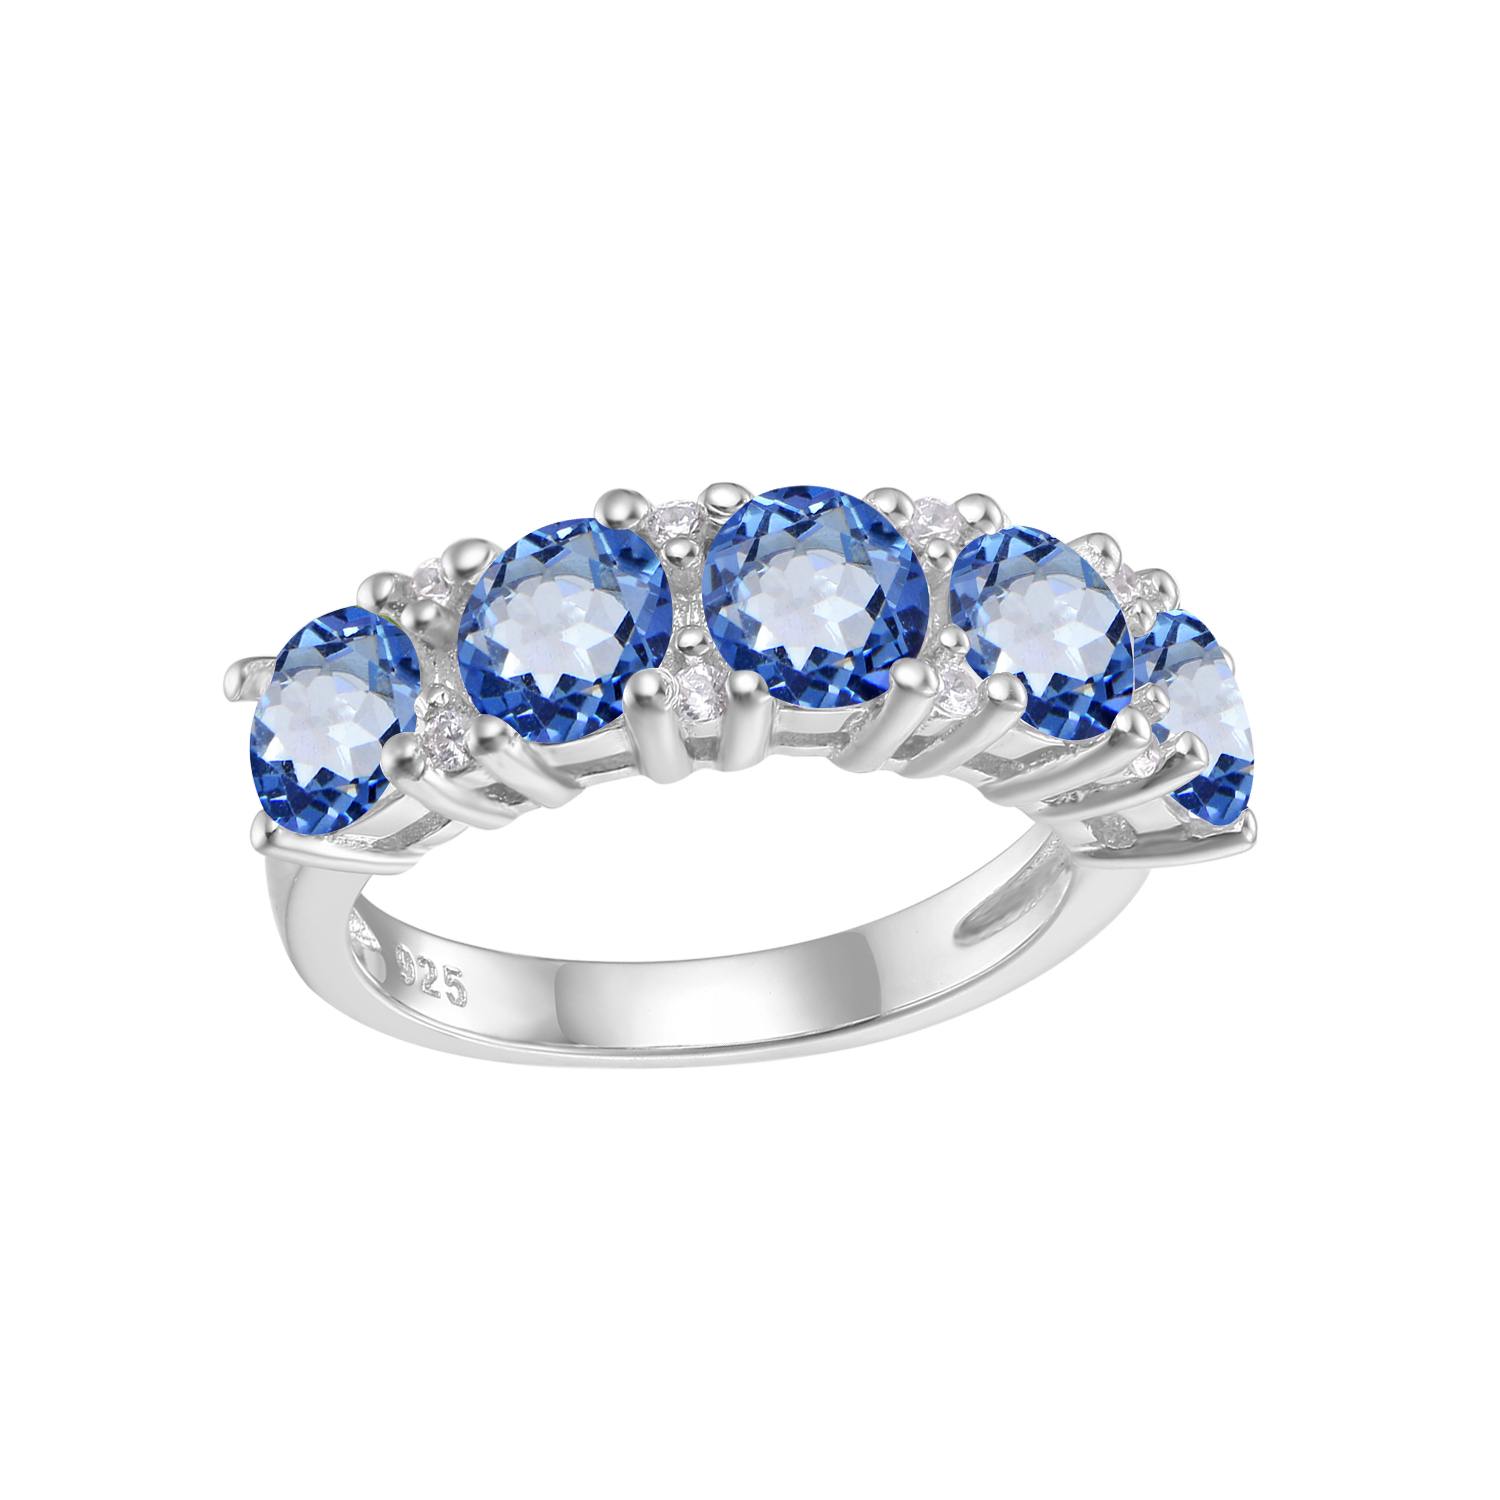 A silver ring set with five dark blue gems.